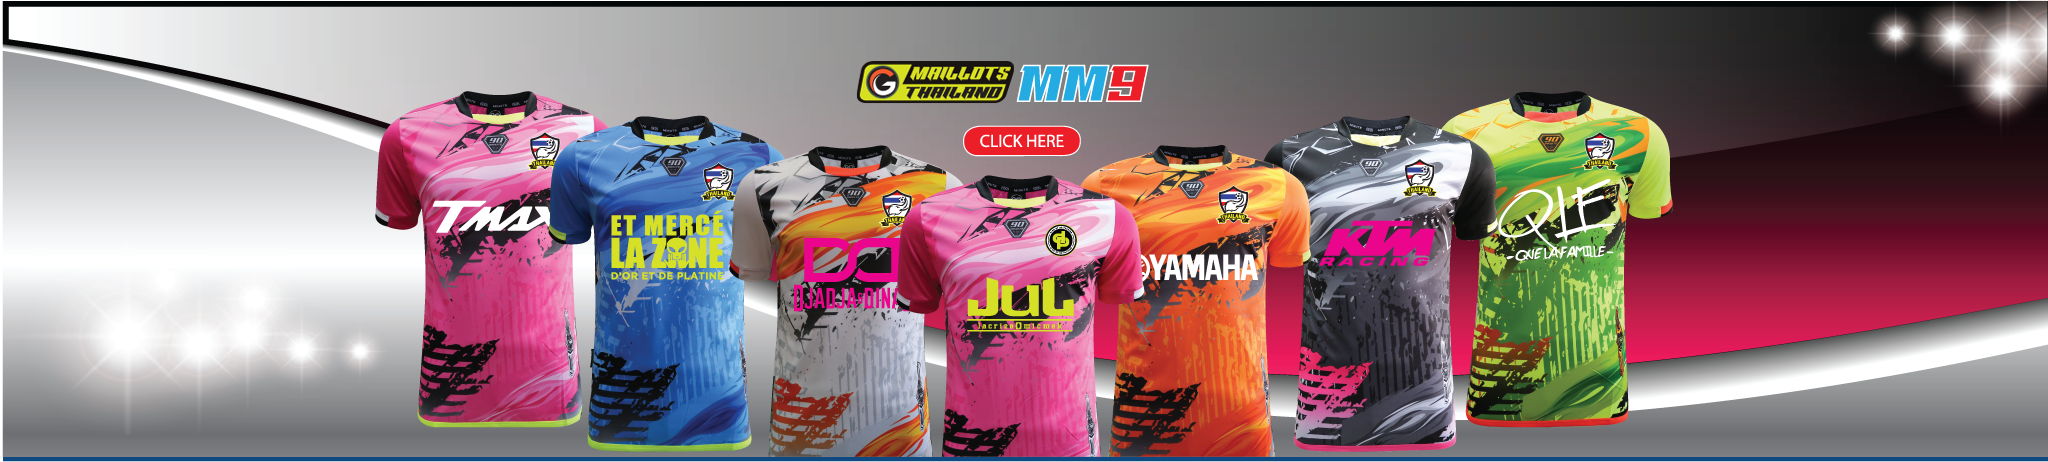 Maillots thailand 90Minute